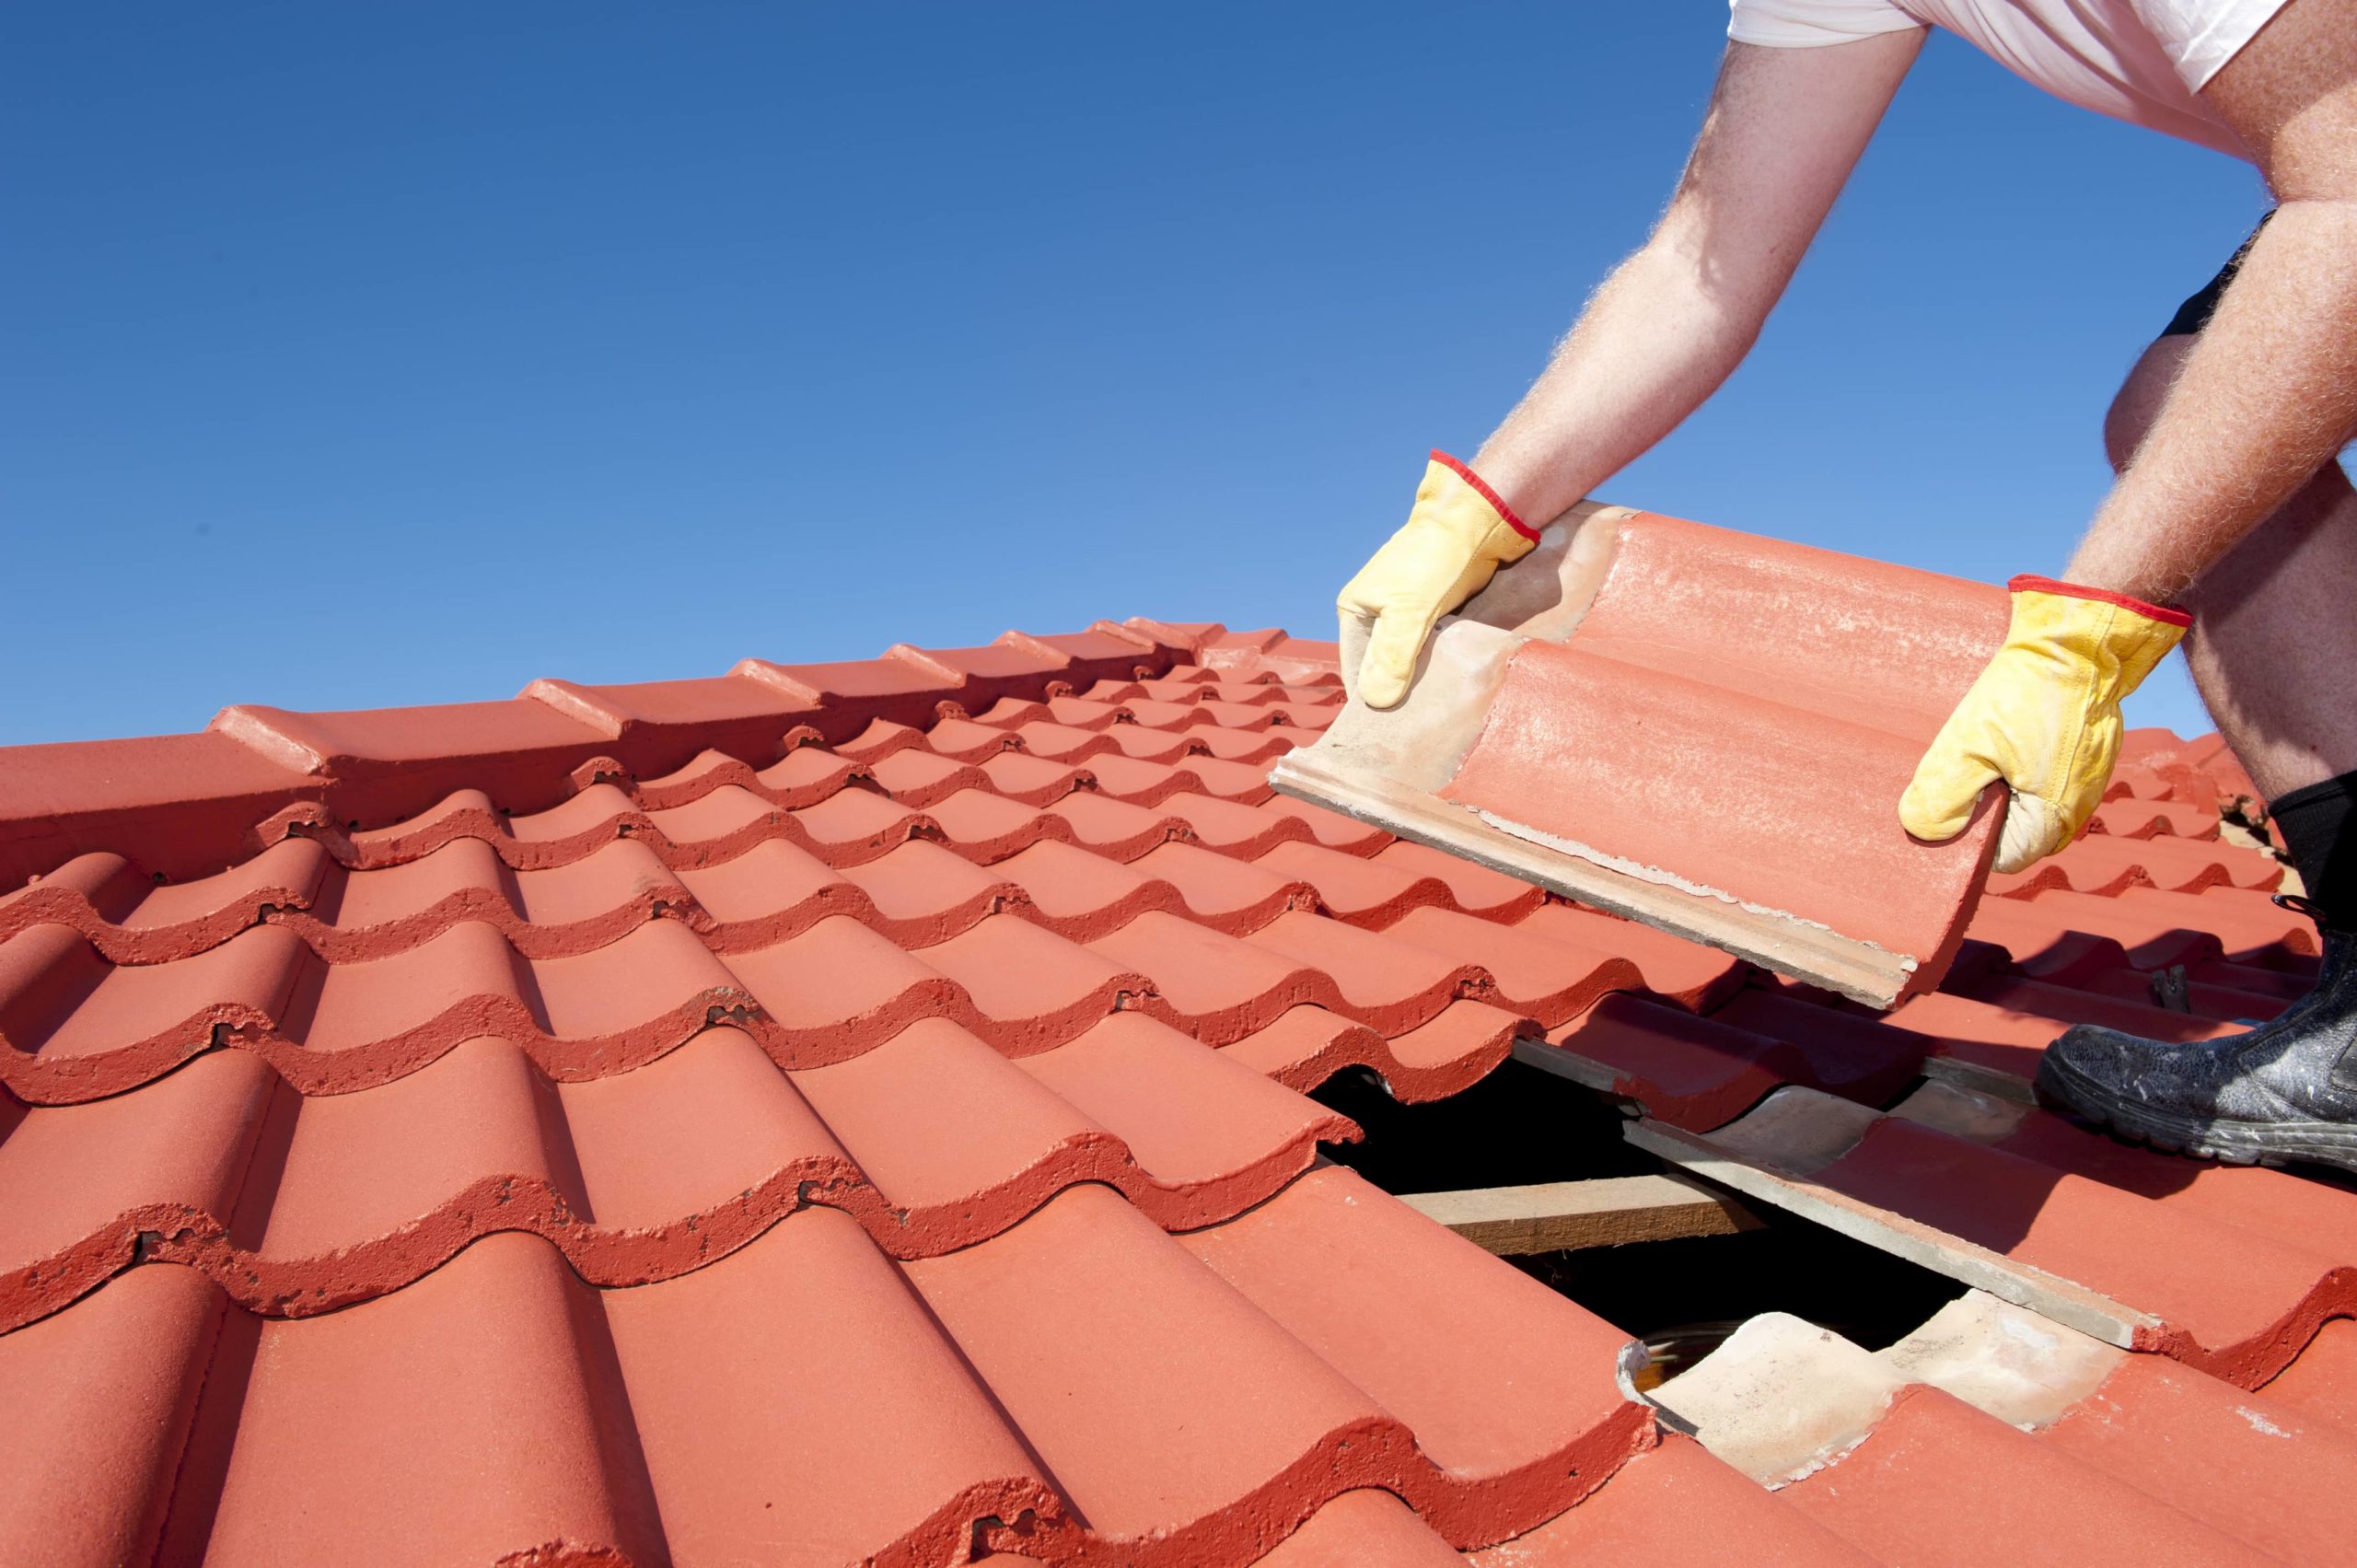 This is an image of a contractor repairing a roofing and replacing a roof shingle.